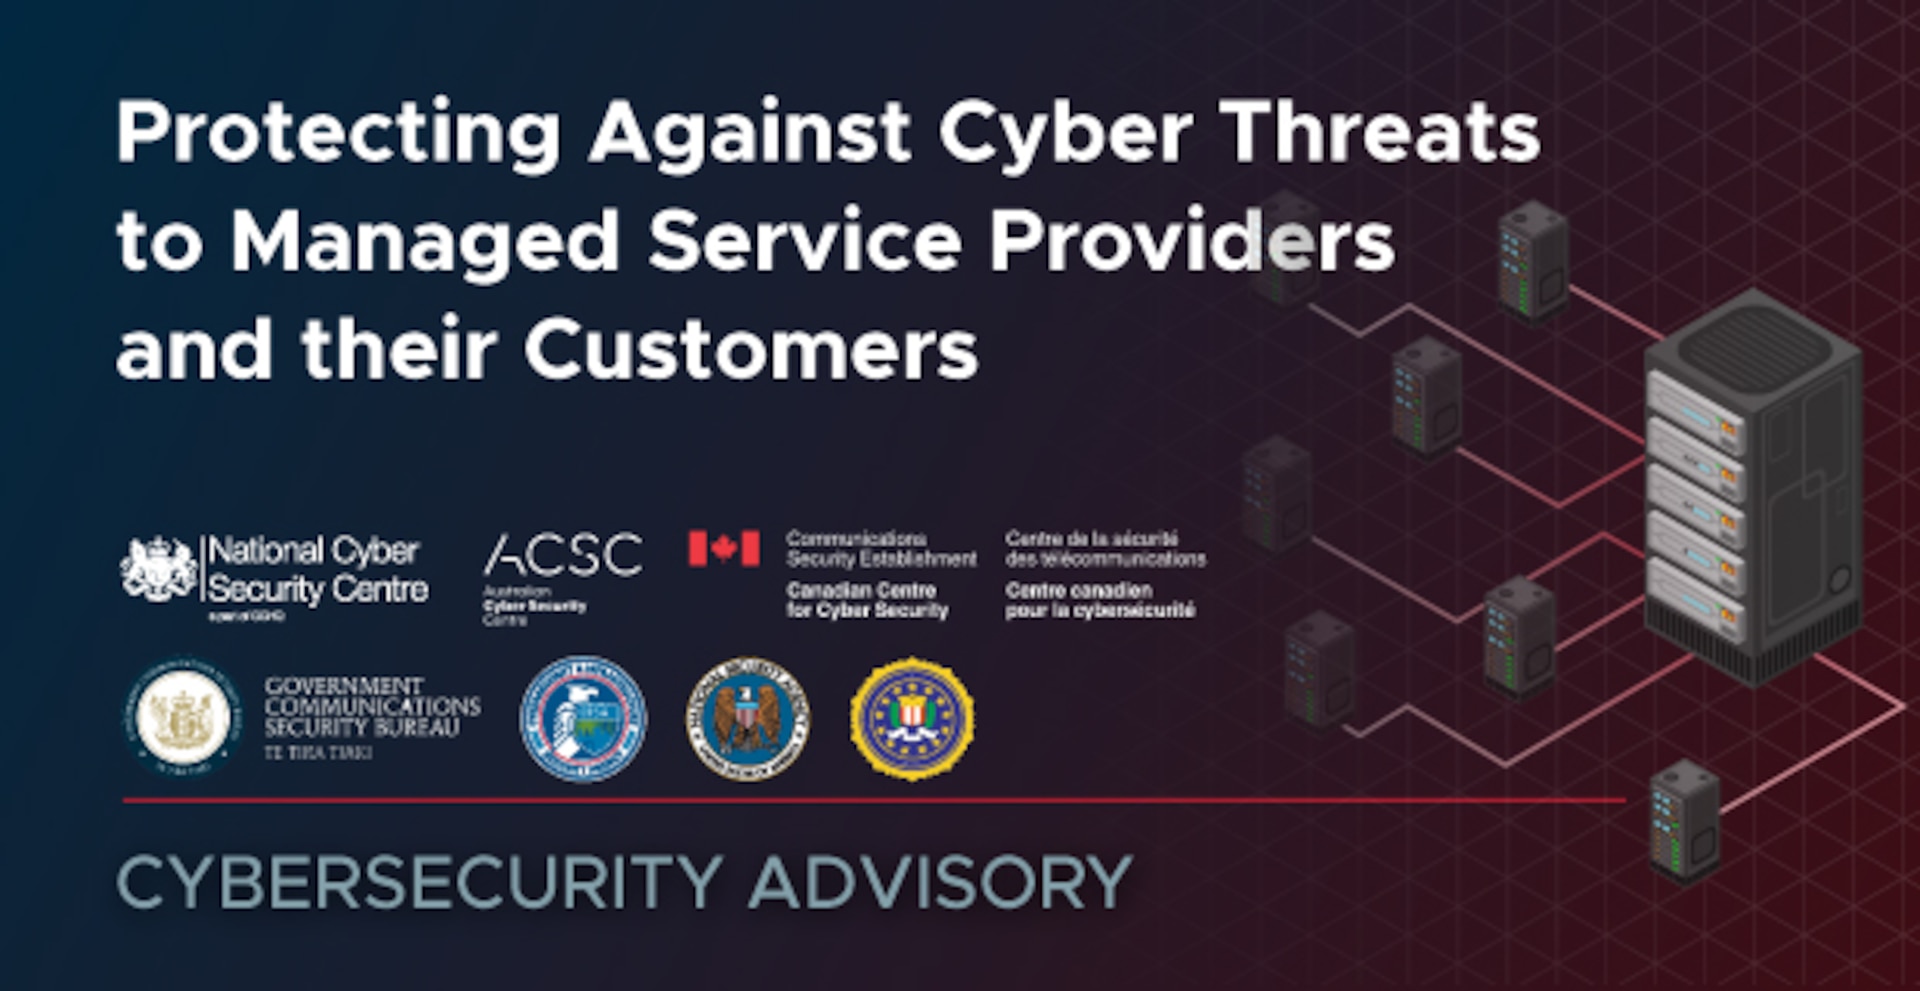 CSA: Protecting Against Cyber Threats to Managed Service Providers and their Customers